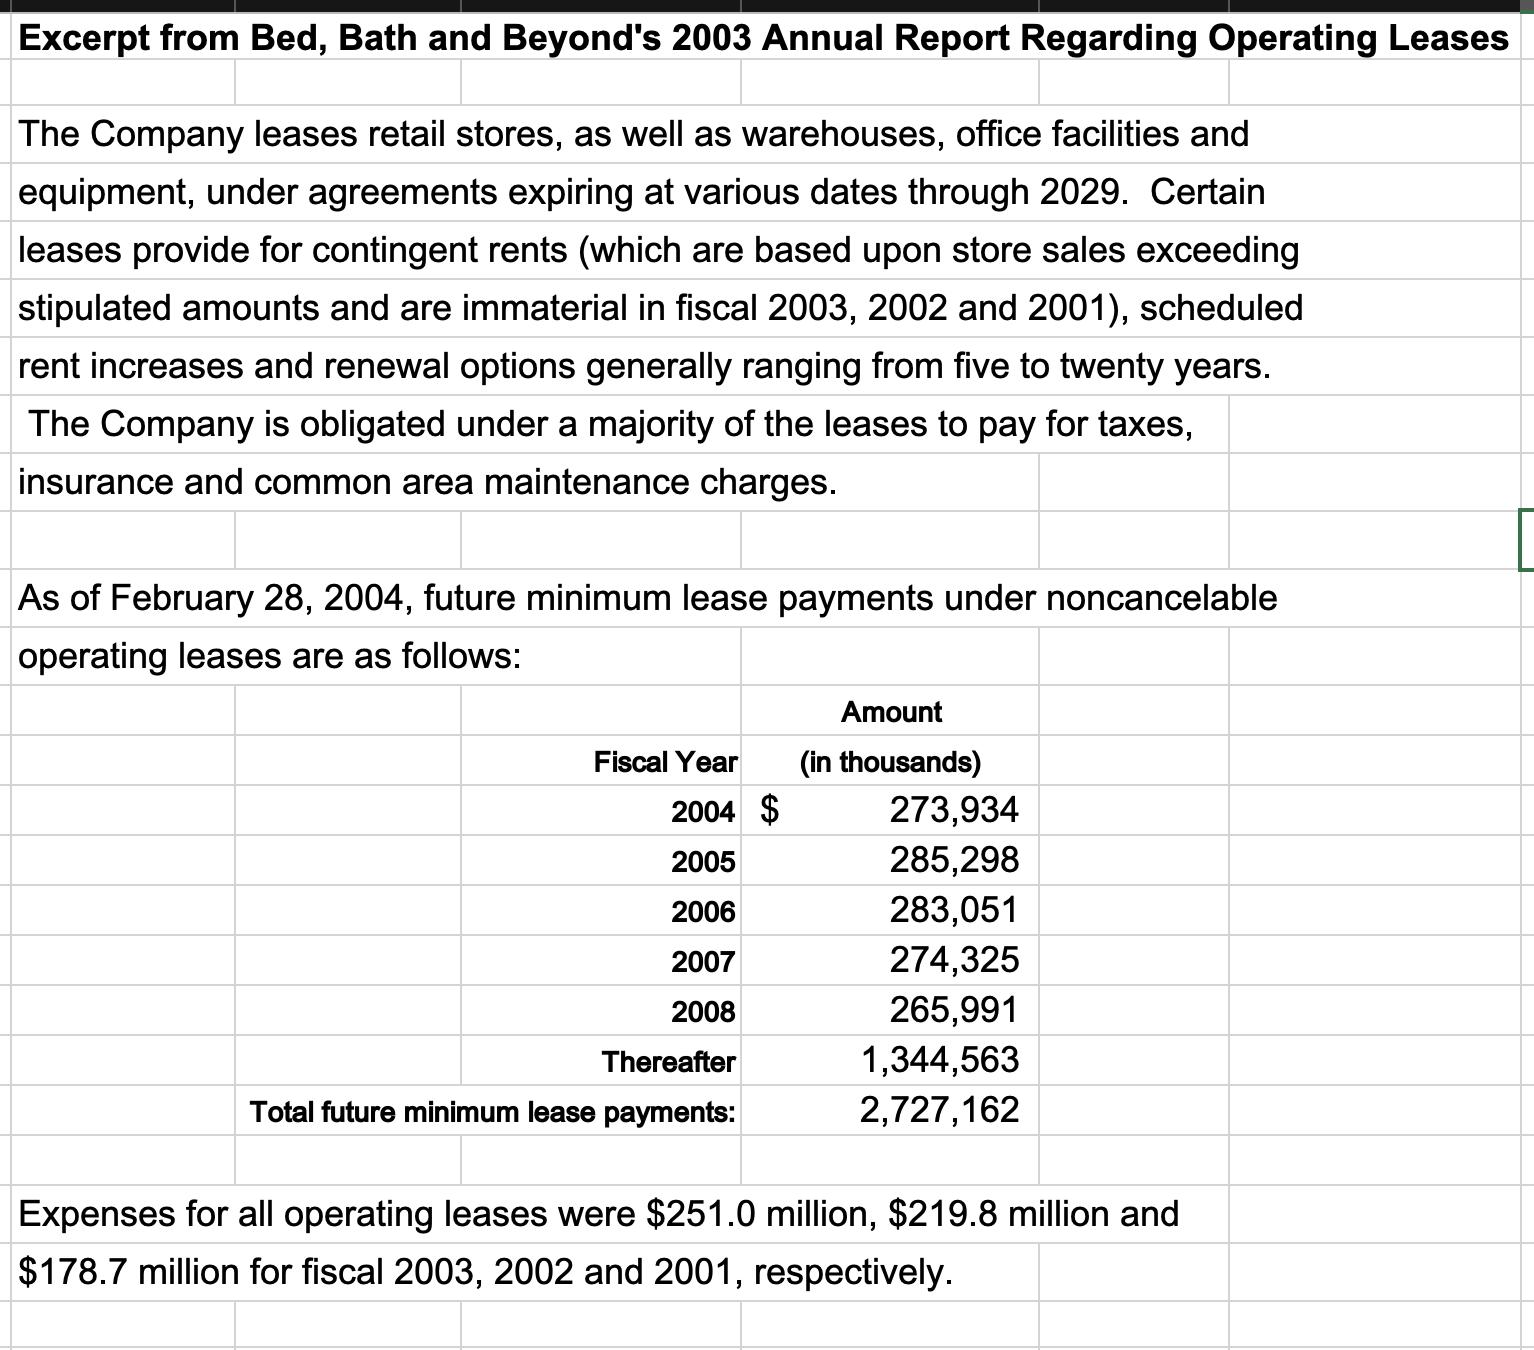 Excerpt from Bed, Bath and Beyond's 2003 Annual Report Regarding Operating Leases The Company leases retail